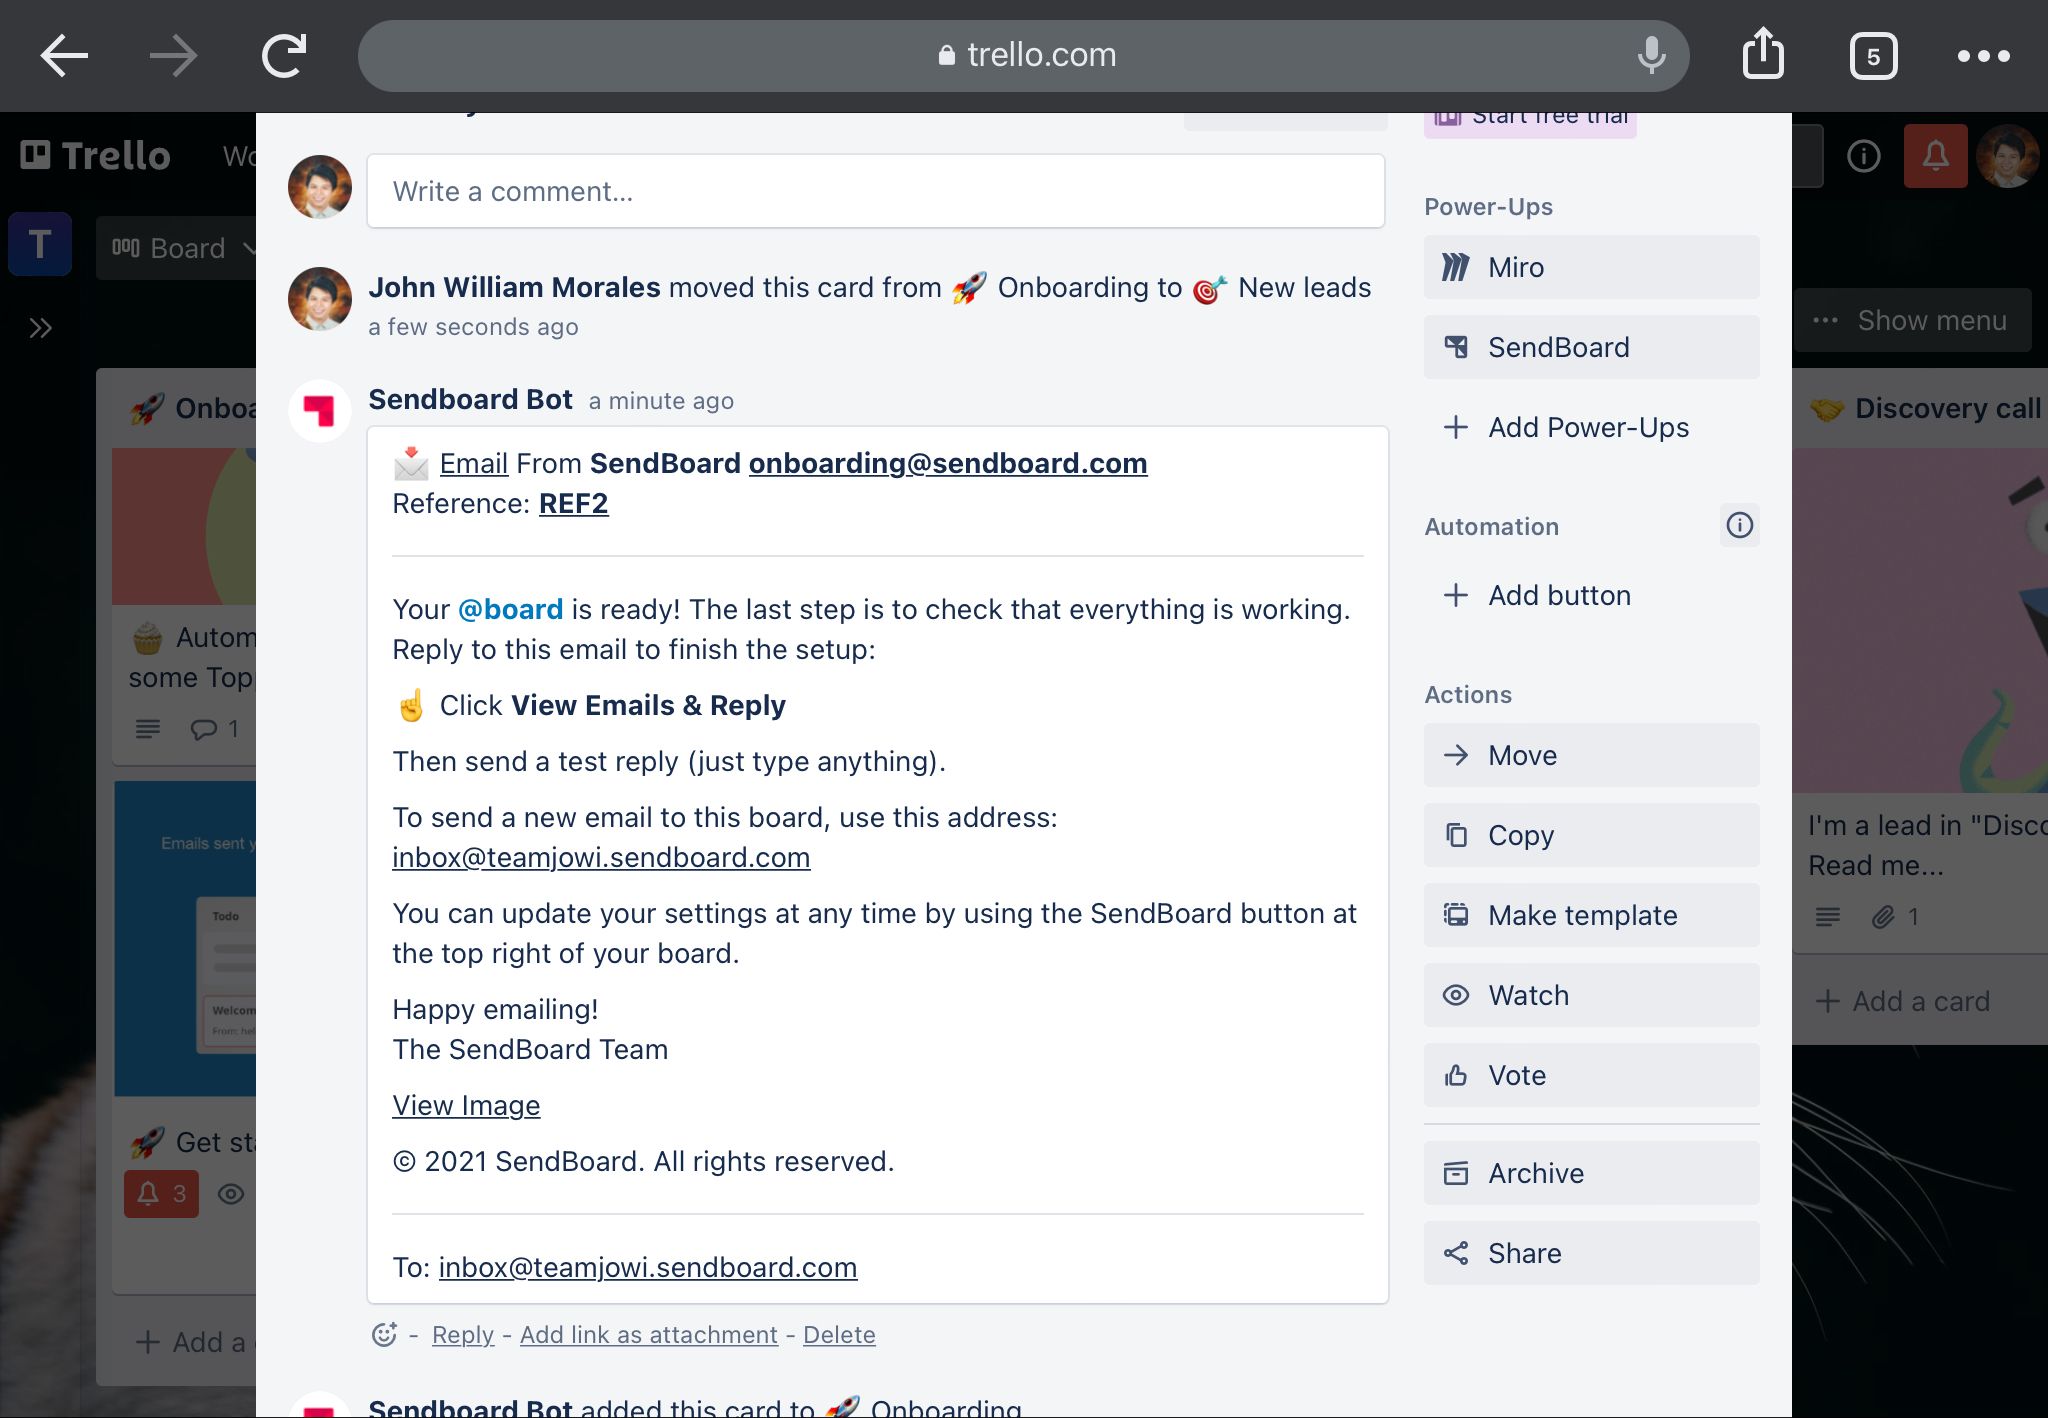 Receive and send emails directly on Trello boards